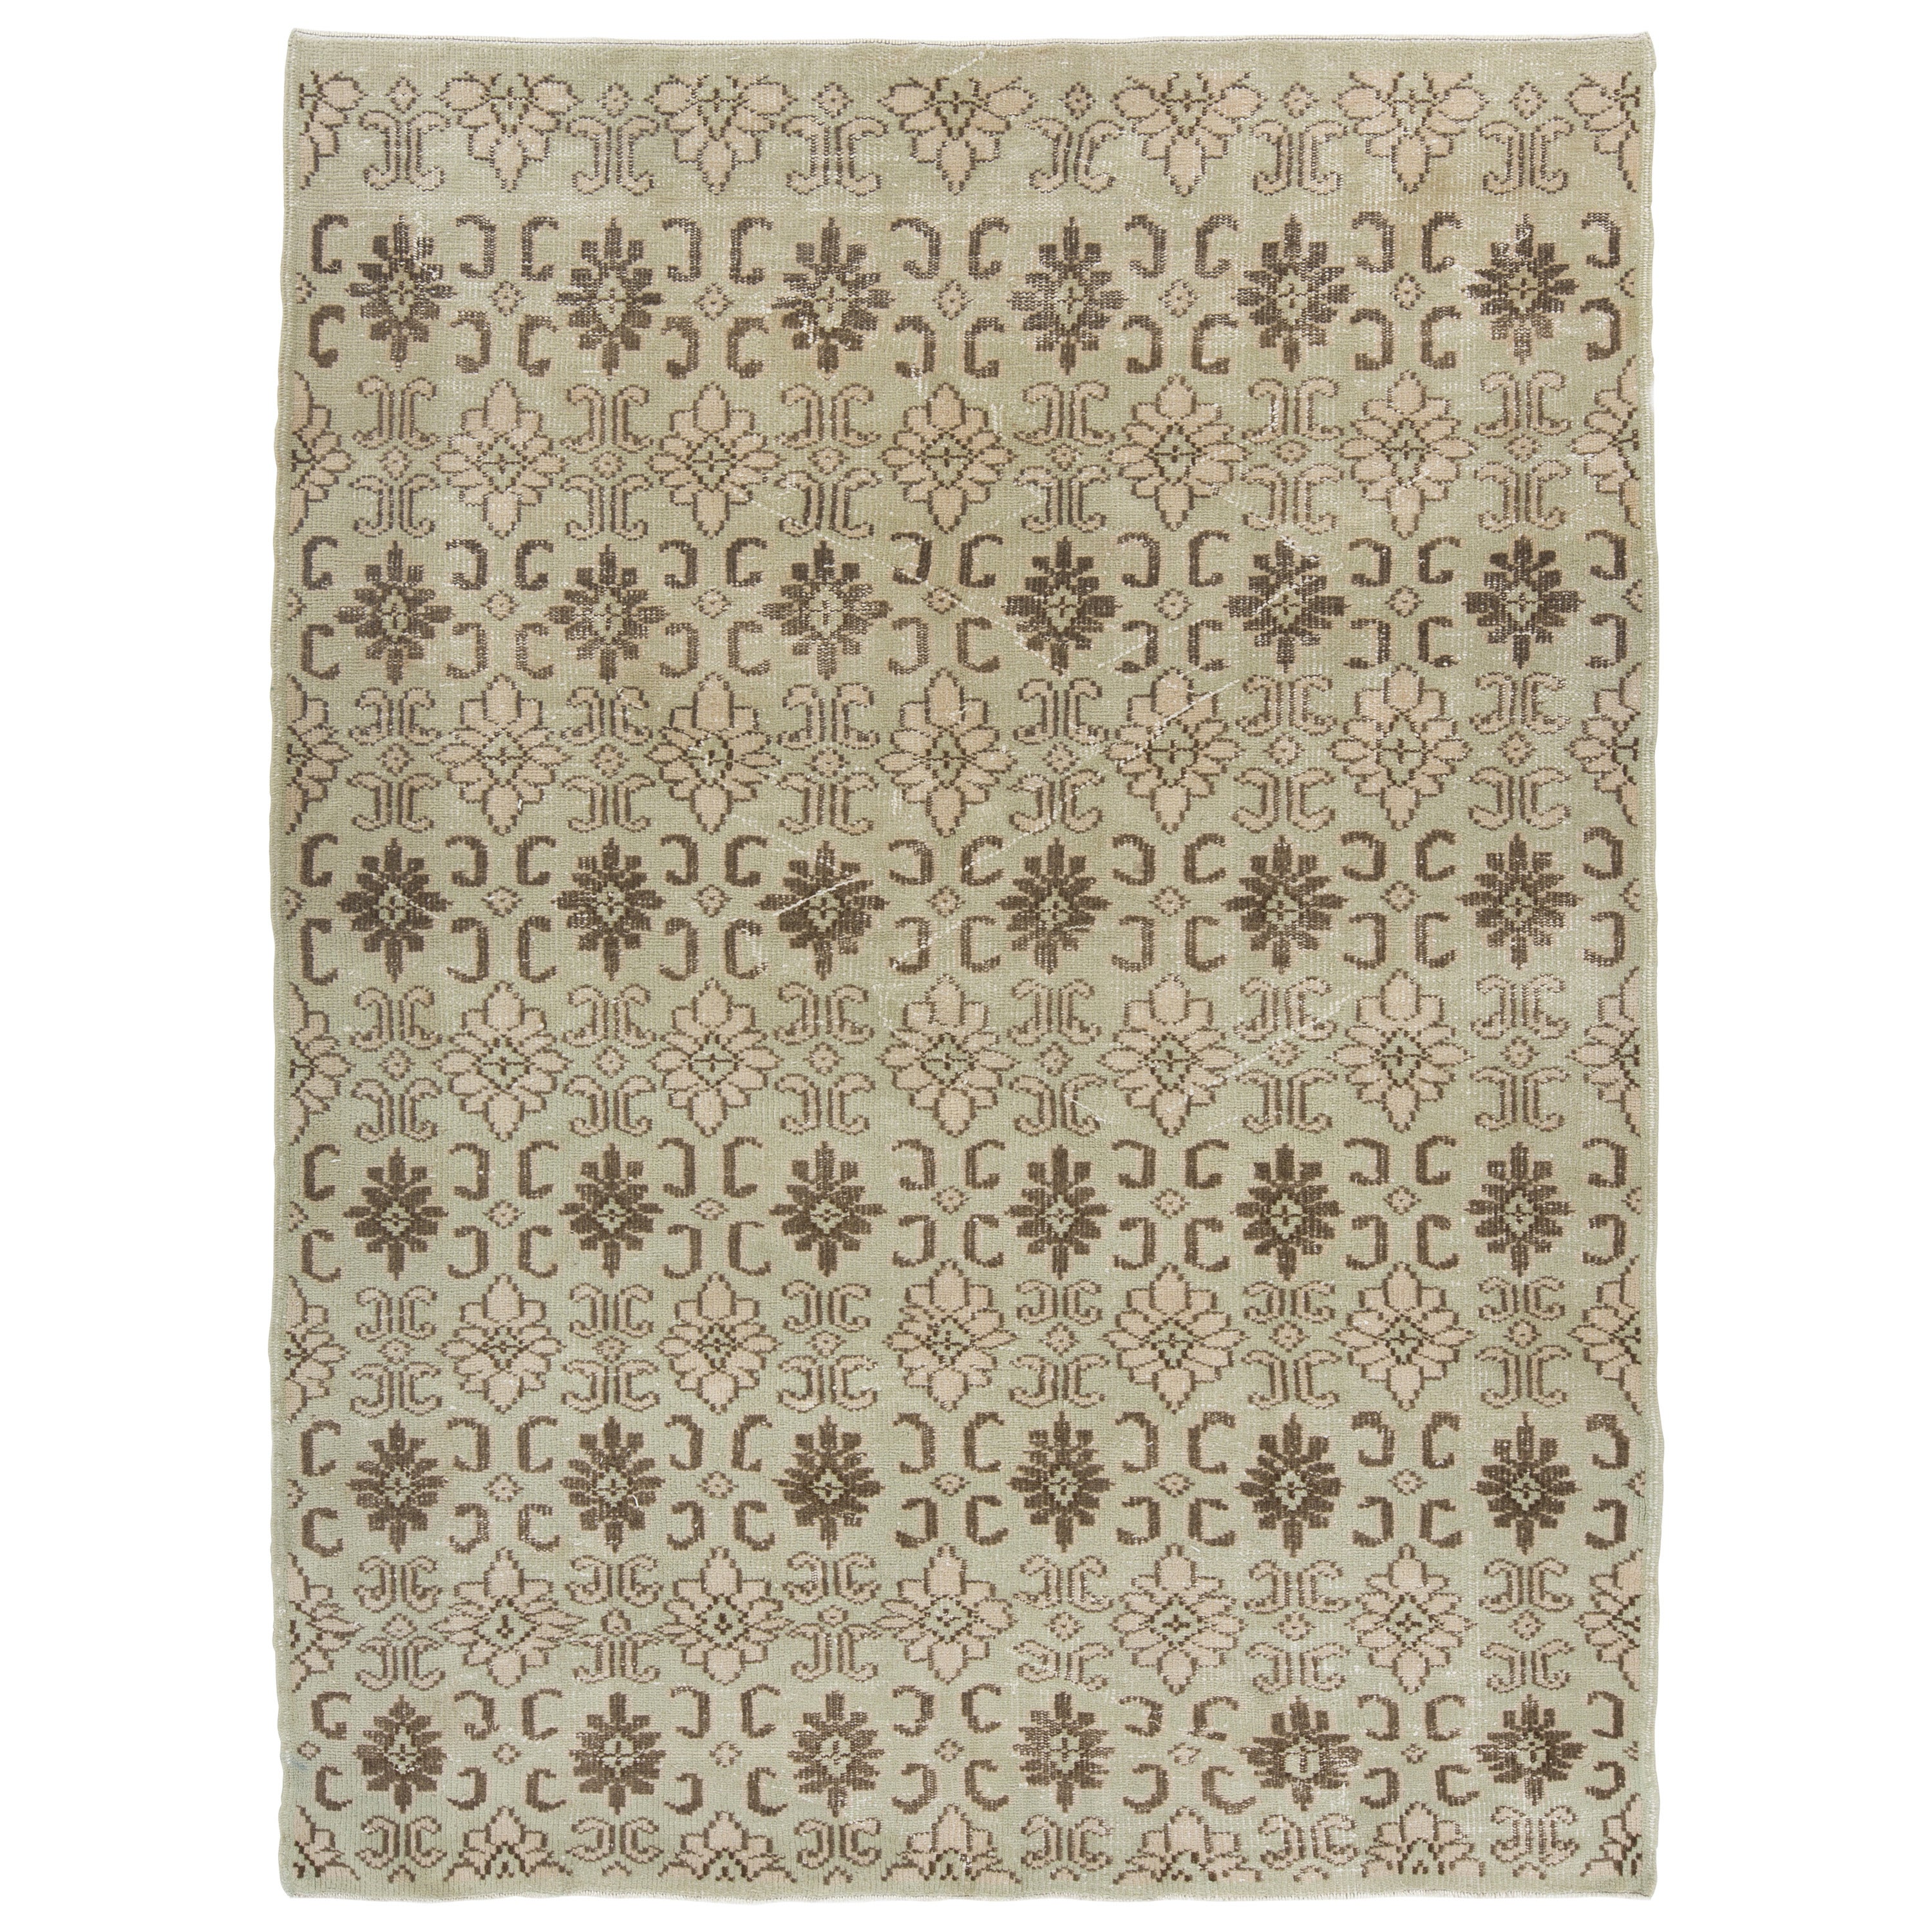 Midcentury Turkish Rug in Muted Colors